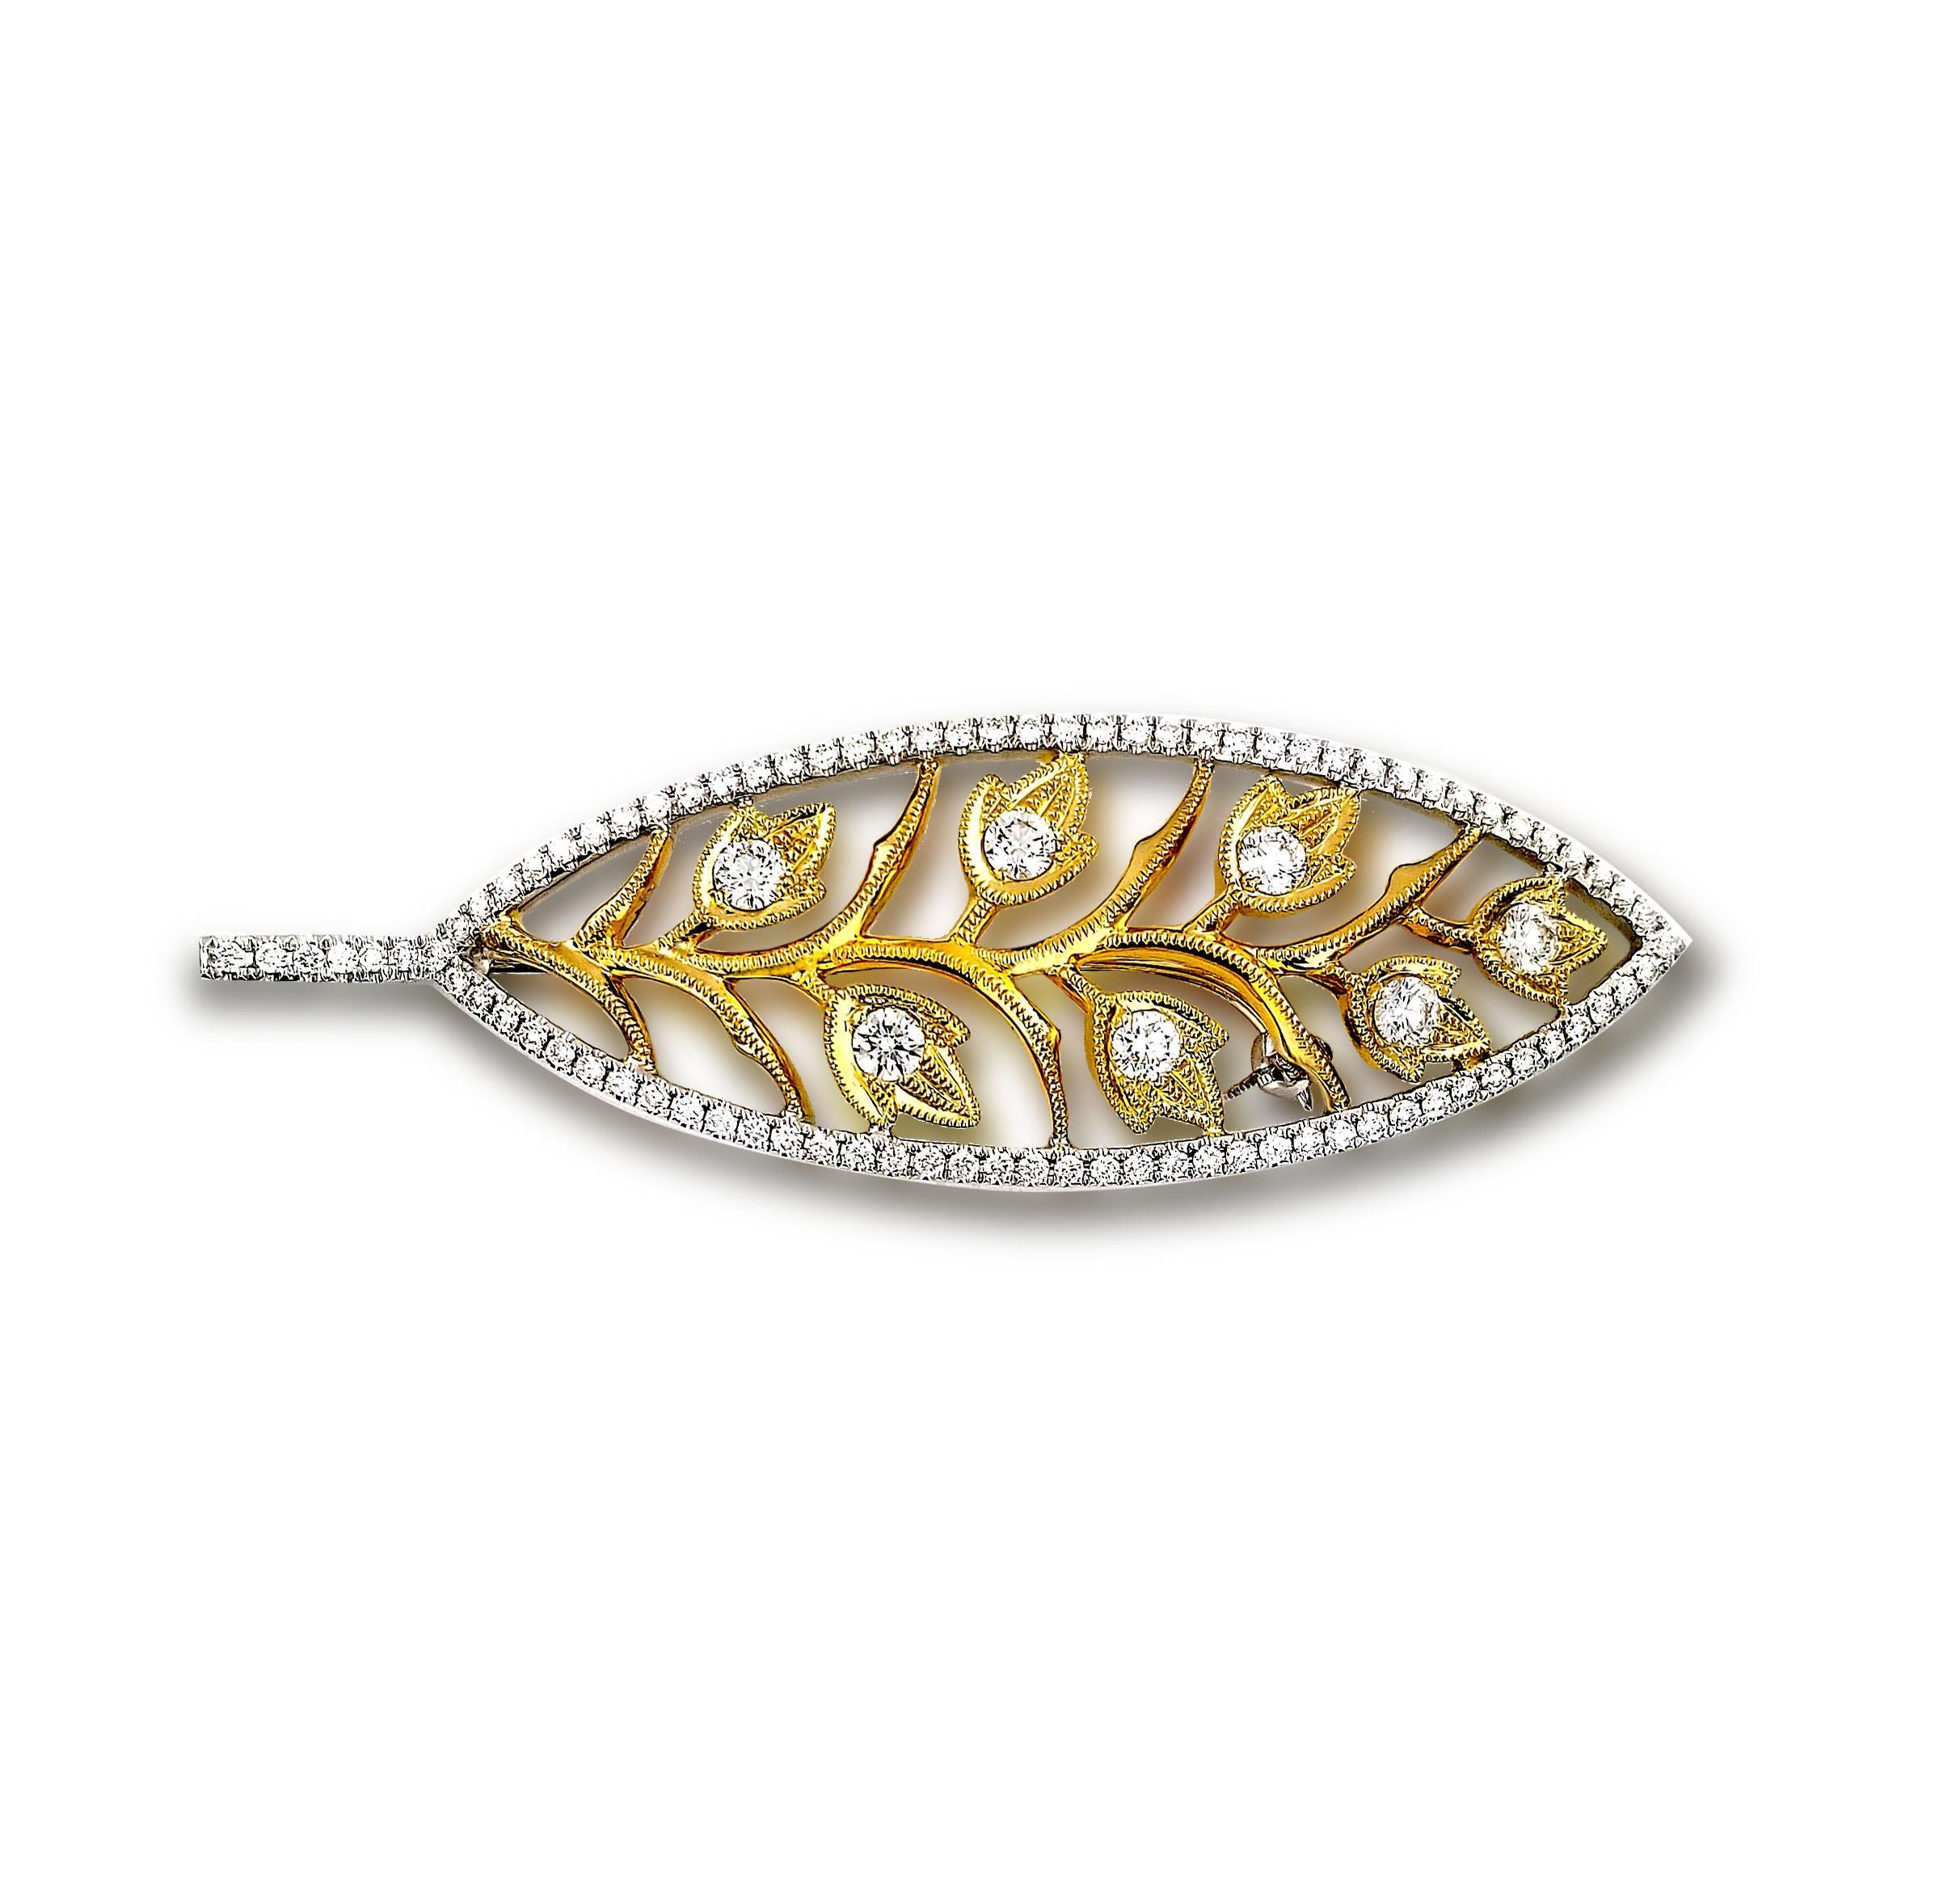 Produced by award winning Italian designer Stefano Vitolo. Stefano creates custom artisanal one of a kind jewelry with excellent gemstones in a truly old world Italian craftmanship.
This handcrafted brooch has 1.43 total carat weight of F/G color